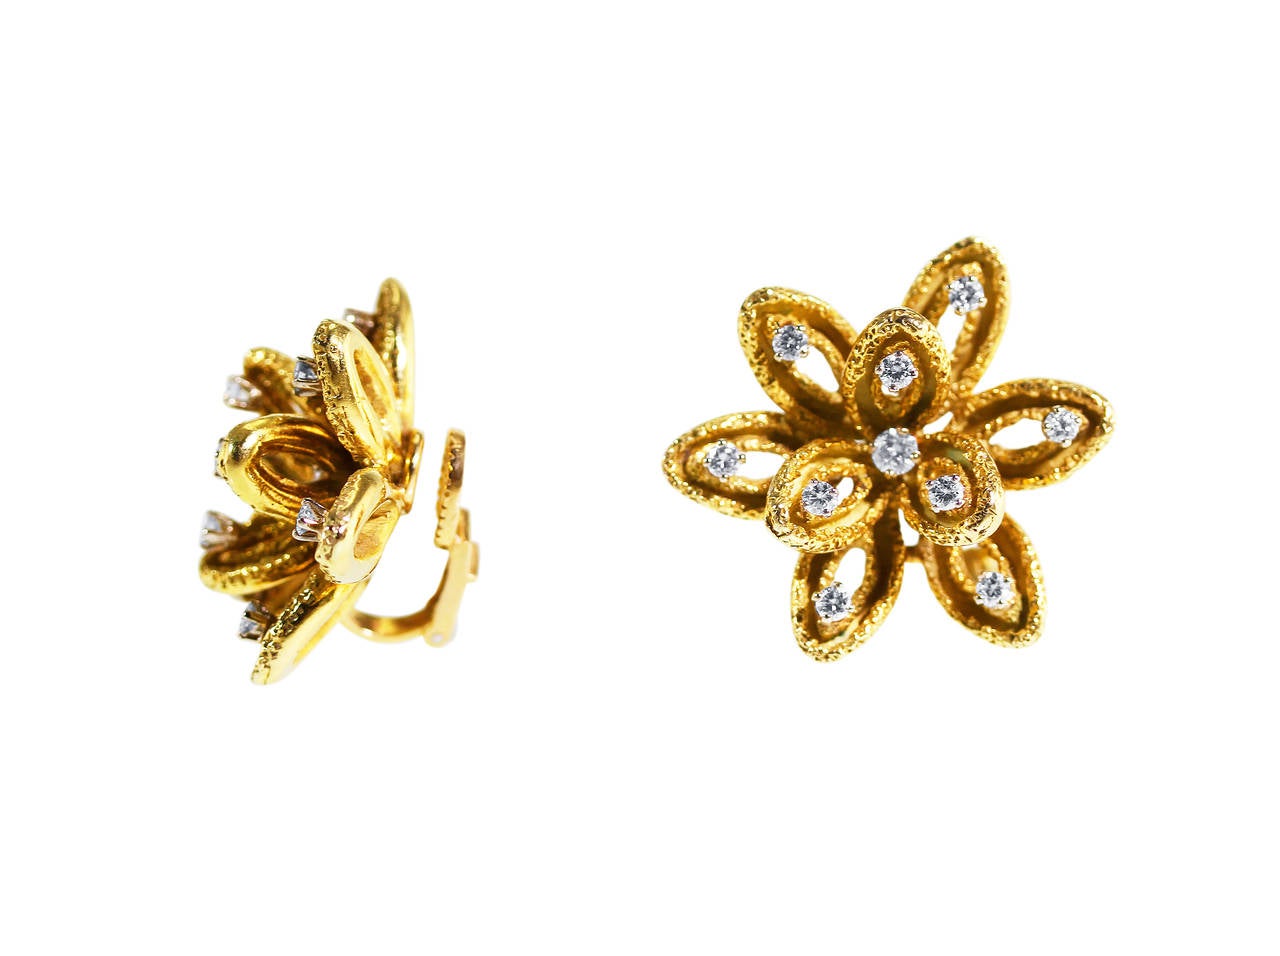 A pair of 18 karat yellow gold and diamond flower earclips by Boucheron, Paris, designed as stylized flowers of texutred gold design set with 20 round diamonds weighing approximately 1.10 carats, gross weight 25.7 grams, measuring 1 1/8 by 1 1/8